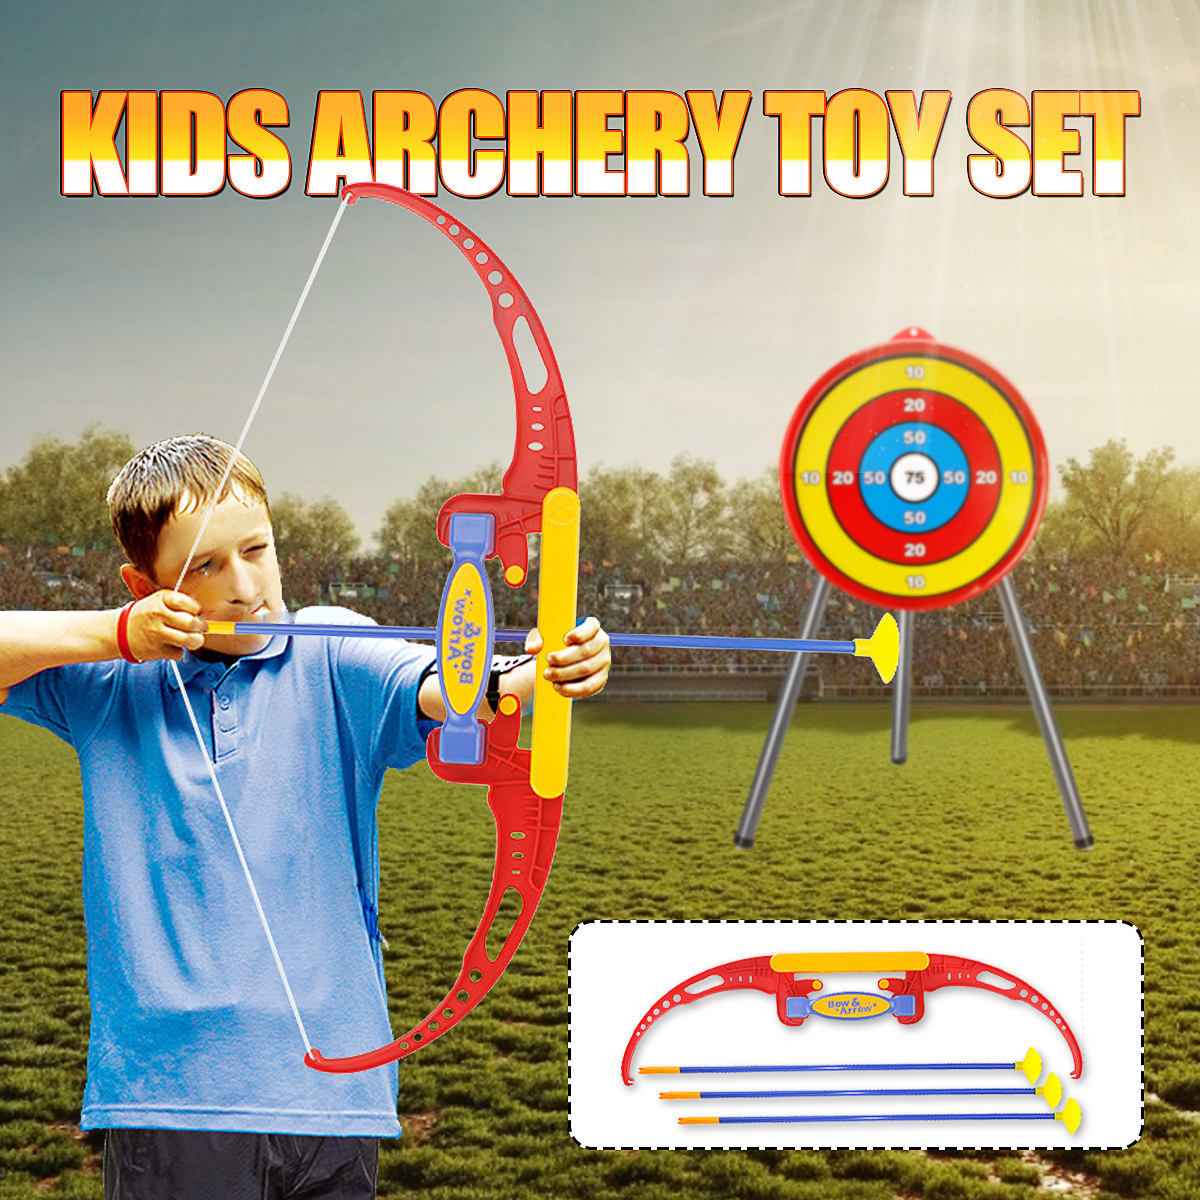 Classic-Archery-Shoot-Game-Set-Develop-Skill-Novelties-Toys-for-Young-Kids-1690766-1